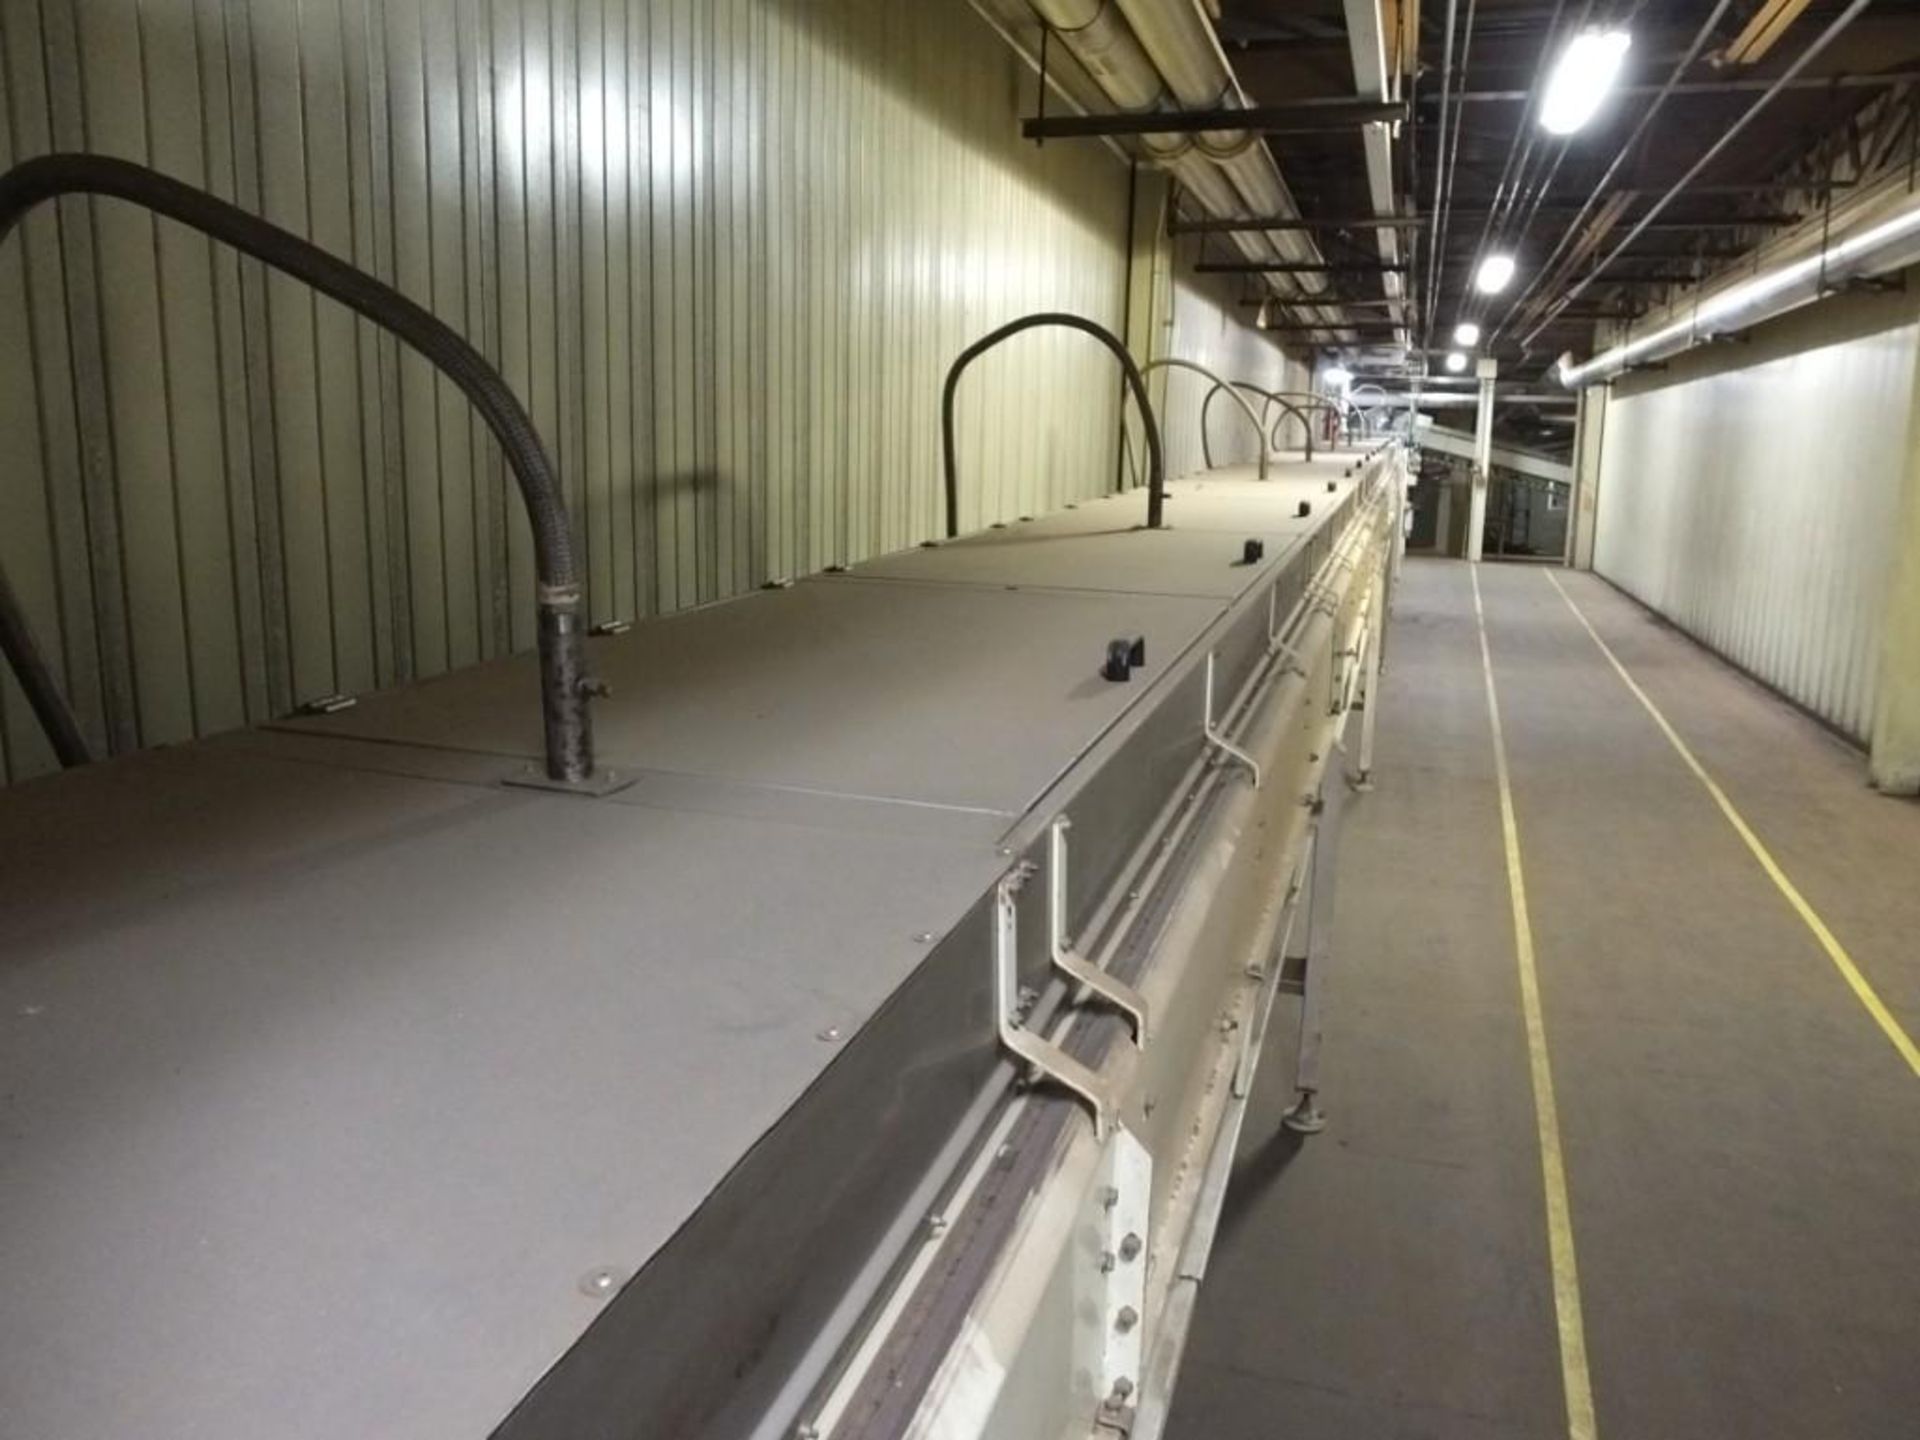 2008 Comas Primary to Secondary Covered Conveyor System - Image 3 of 11